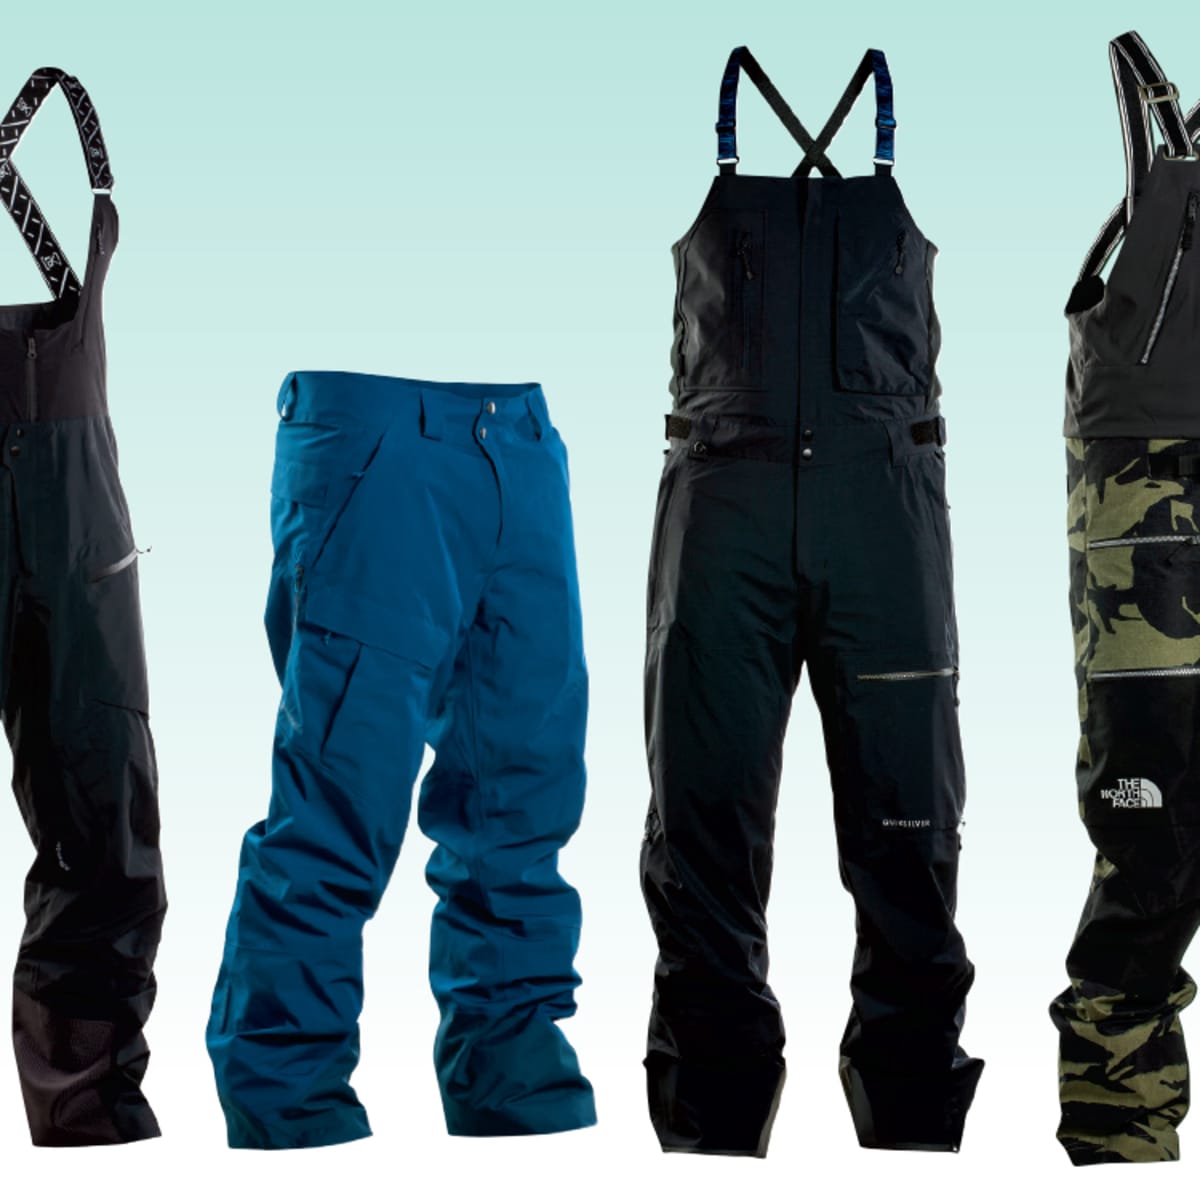 The Best Men's Ski Pants and Bibs of the Year